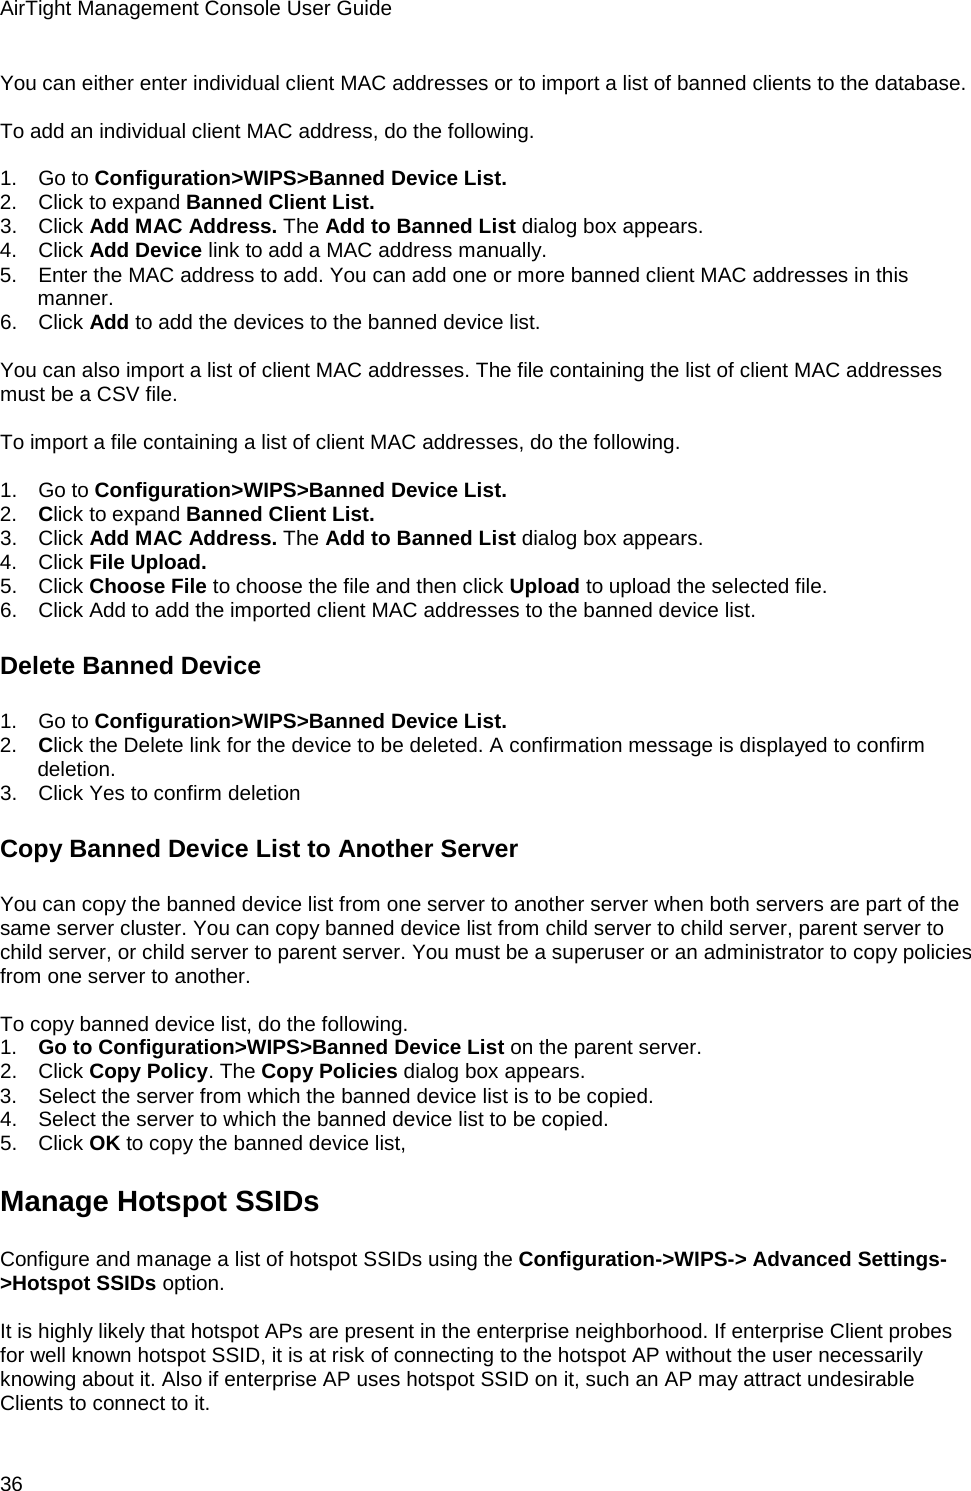 AirTight Management Console User Guide 36 You can either enter individual client MAC addresses or to import a list of banned clients to the database.    To add an individual client MAC address, do the following.   1.      Go to Configuration&gt;WIPS&gt;Banned Device List. 2.      Click to expand Banned Client List. 3.      Click Add MAC Address. The Add to Banned List dialog box appears. 4.      Click Add Device link to add a MAC address manually. 5.      Enter the MAC address to add. You can add one or more banned client MAC addresses in this manner. 6.      Click Add to add the devices to the banned device list.   You can also import a list of client MAC addresses. The file containing the list of client MAC addresses must be a CSV file.   To import a file containing a list of client MAC addresses, do the following.   1.      Go to Configuration&gt;WIPS&gt;Banned Device List. 2.      Click to expand Banned Client List. 3.      Click Add MAC Address. The Add to Banned List dialog box appears. 4.      Click File Upload. 5.      Click Choose File to choose the file and then click Upload to upload the selected file. 6.      Click Add to add the imported client MAC addresses to the banned device list. Delete Banned Device 1.      Go to Configuration&gt;WIPS&gt;Banned Device List. 2.      Click the Delete link for the device to be deleted. A confirmation message is displayed to confirm deletion. 3.      Click Yes to confirm deletion Copy Banned Device List to Another Server You can copy the banned device list from one server to another server when both servers are part of the same server cluster. You can copy banned device list from child server to child server, parent server to child server, or child server to parent server. You must be a superuser or an administrator to copy policies from one server to another.   To copy banned device list, do the following. 1.      Go to Configuration&gt;WIPS&gt;Banned Device List on the parent server. 2.      Click Copy Policy. The Copy Policies dialog box appears. 3.      Select the server from which the banned device list is to be copied. 4.      Select the server to which the banned device list to be copied. 5.      Click OK to copy the banned device list, Manage Hotspot SSIDs Configure and manage a list of hotspot SSIDs using the Configuration-&gt;WIPS-&gt; Advanced Settings-&gt;Hotspot SSIDs option.   It is highly likely that hotspot APs are present in the enterprise neighborhood. If enterprise Client probes for well known hotspot SSID, it is at risk of connecting to the hotspot AP without the user necessarily knowing about it. Also if enterprise AP uses hotspot SSID on it, such an AP may attract undesirable Clients to connect to it. 